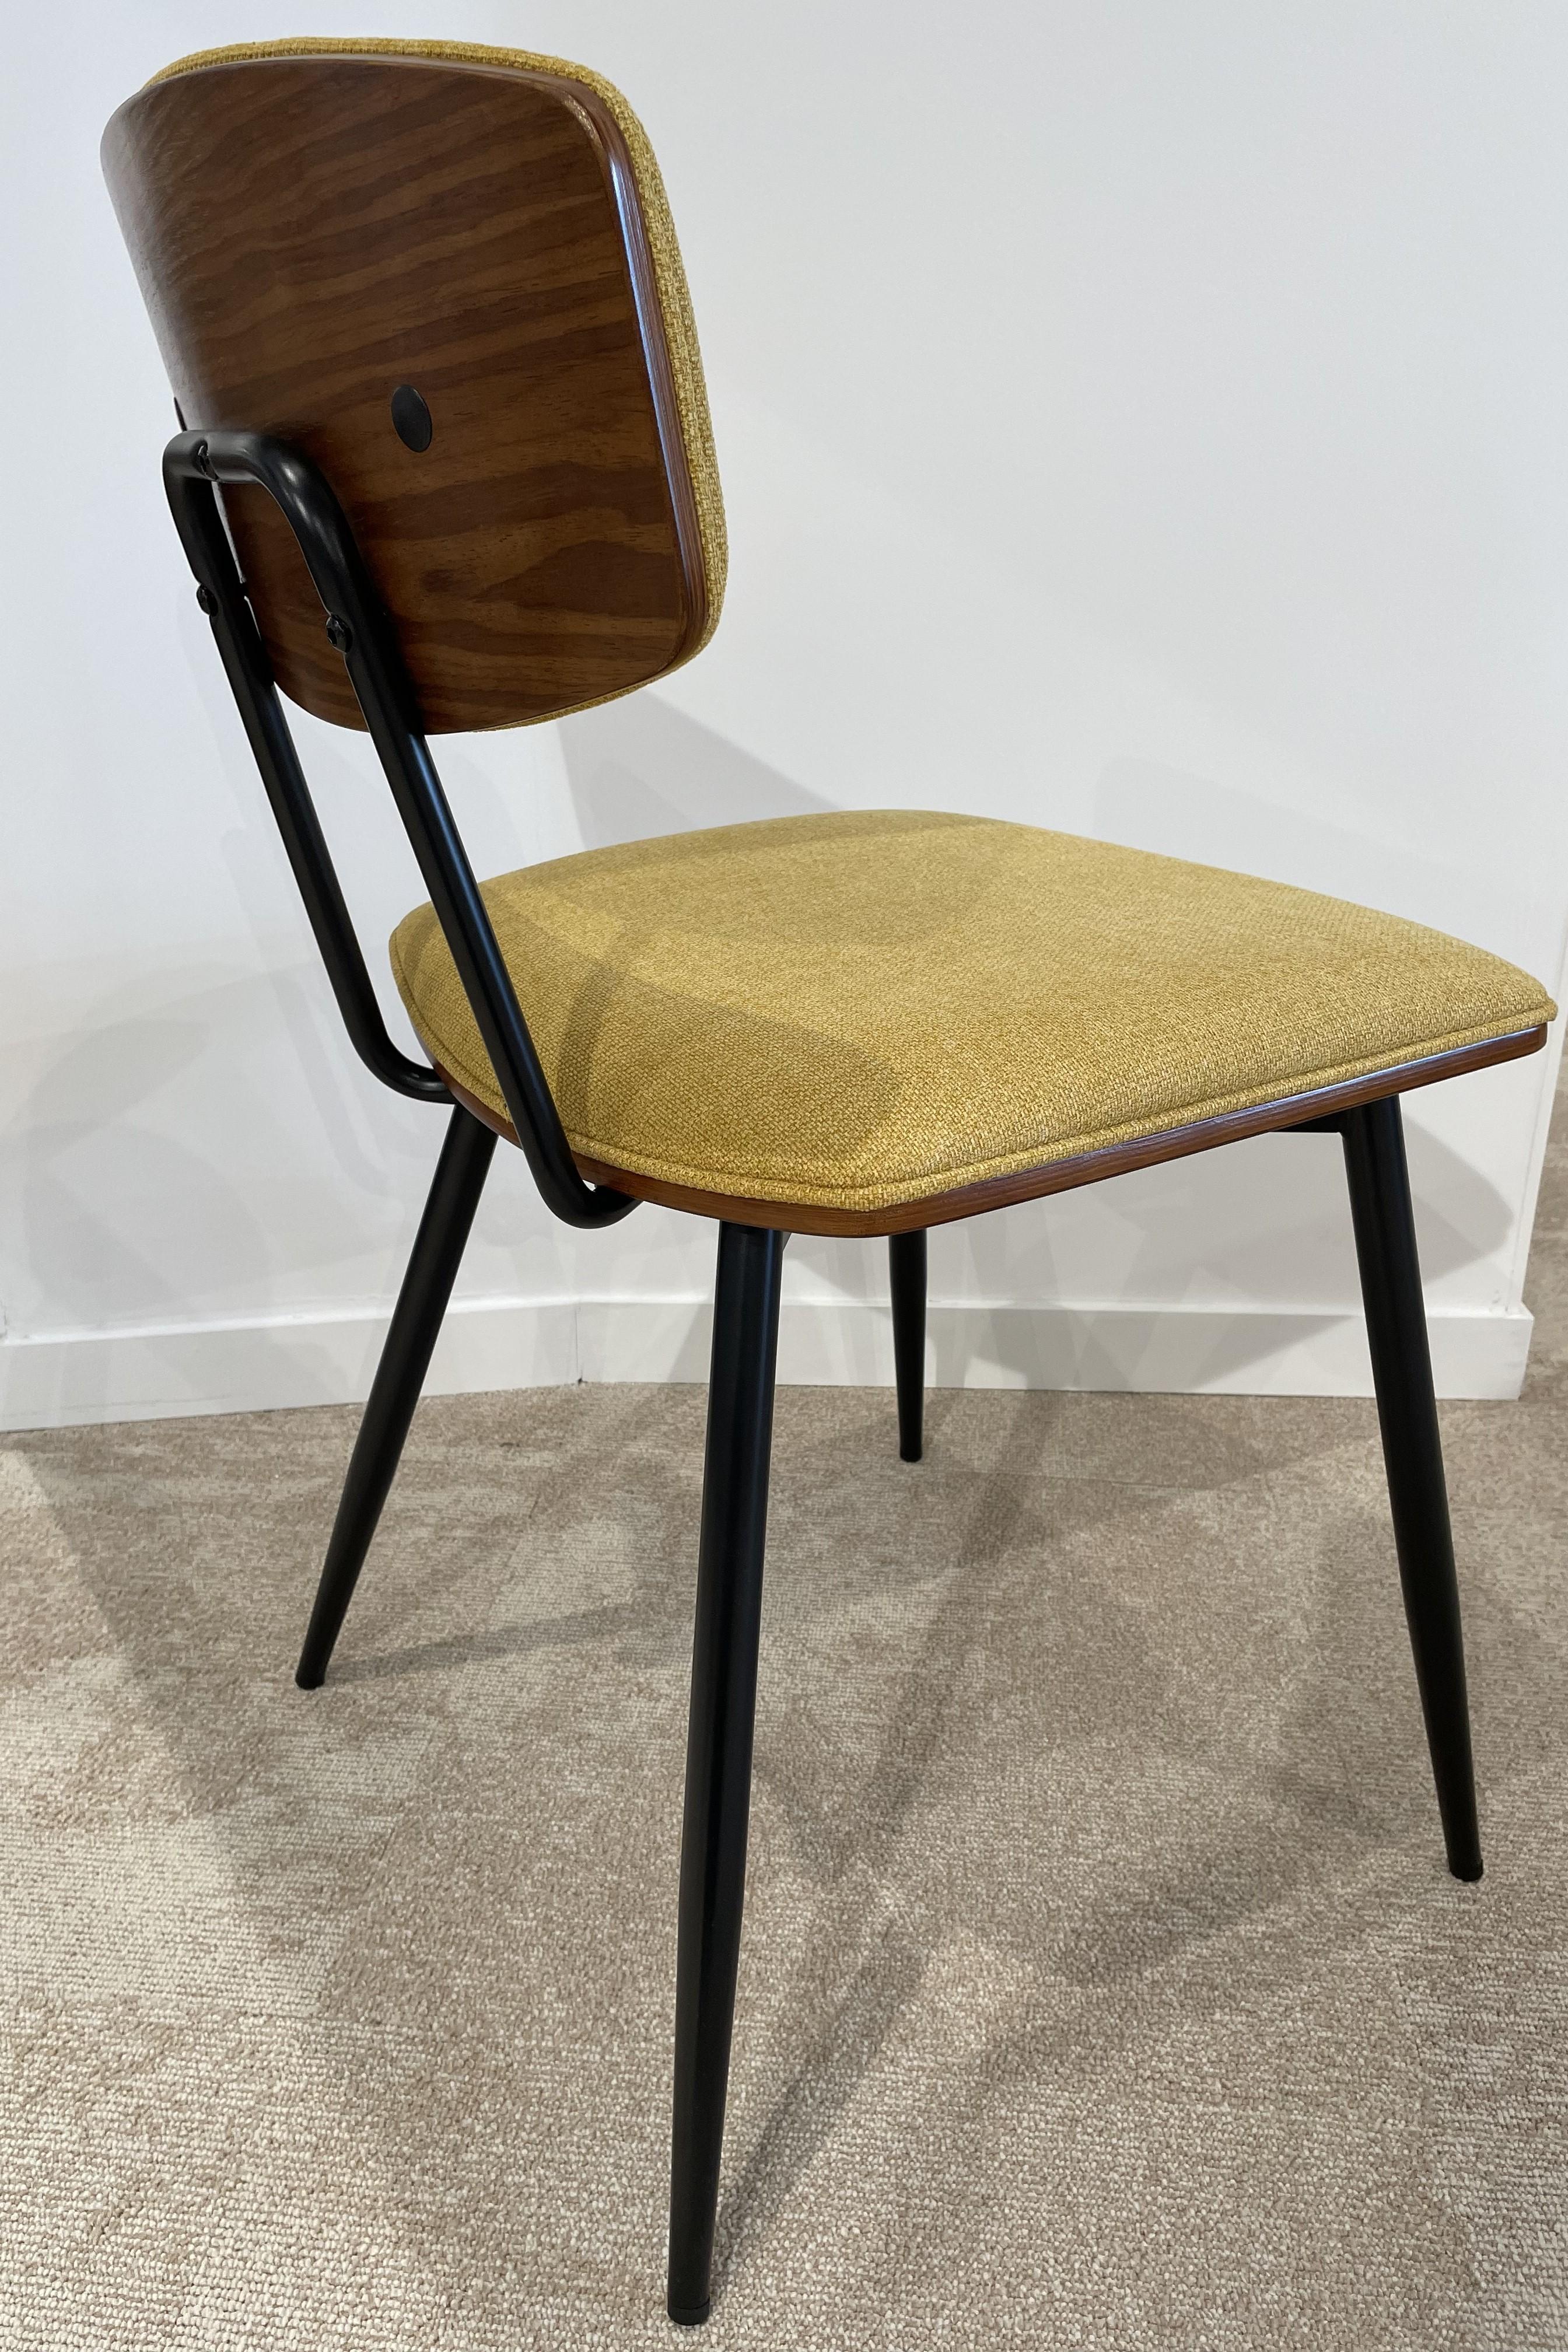 1950s Design and Mid Century Design Style Plywood, Black Metal and Fabric Chair For Sale 2